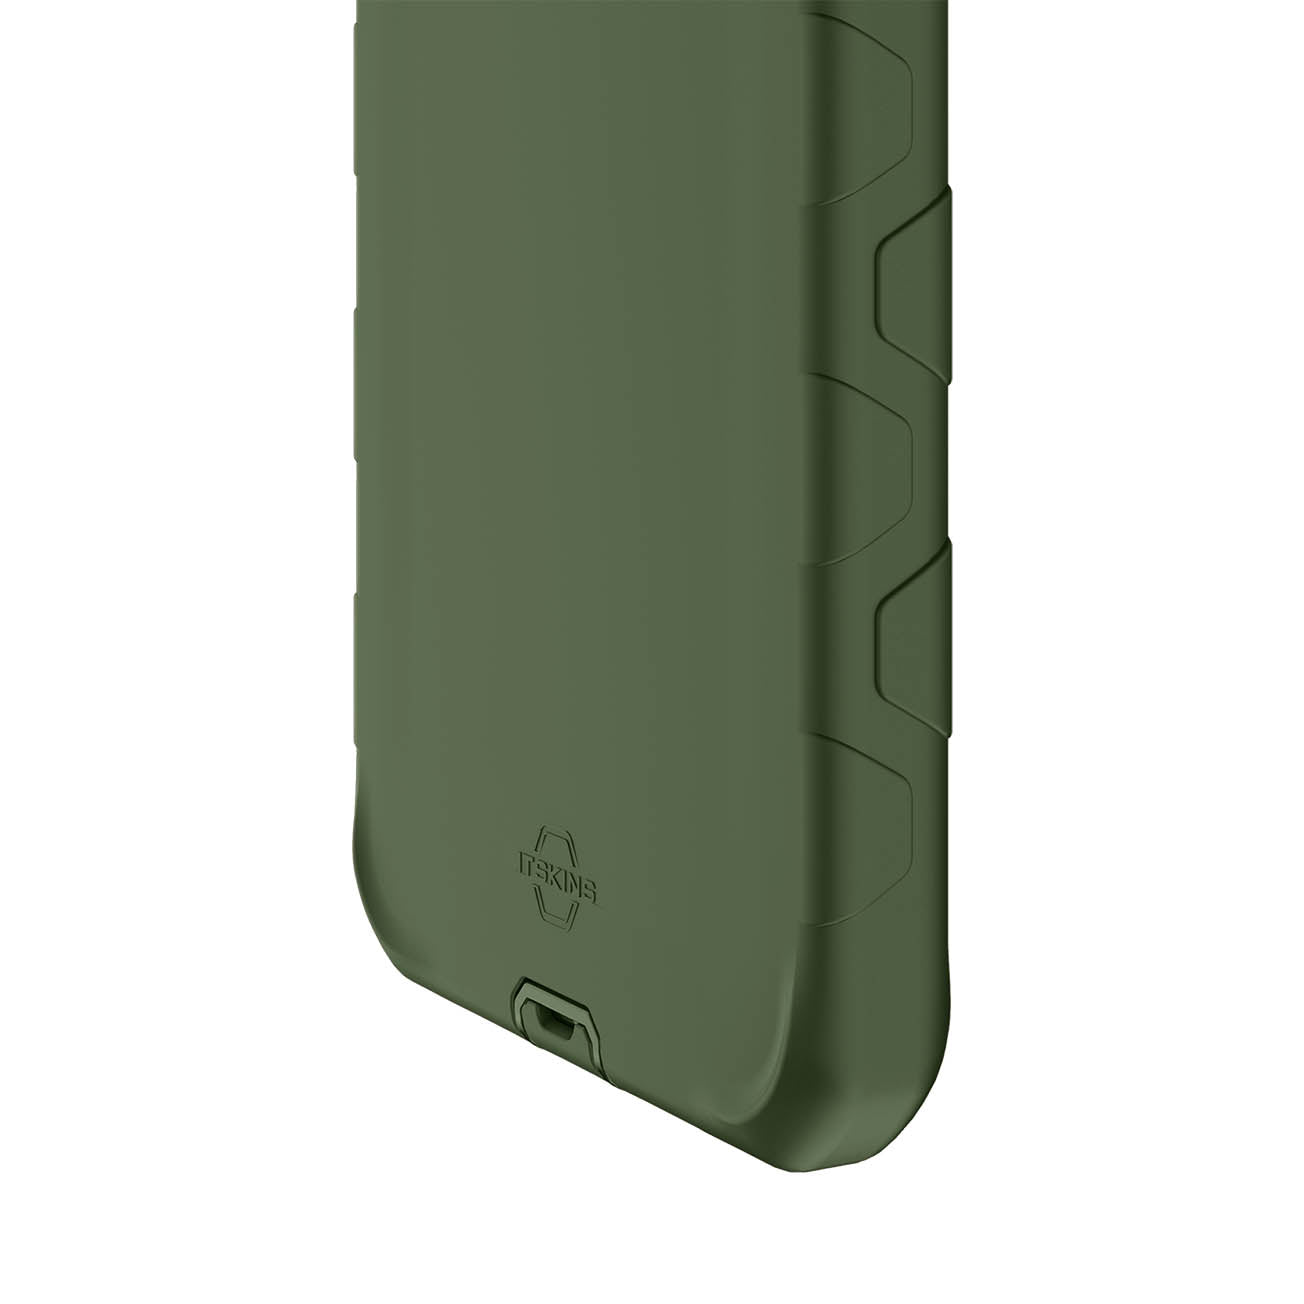 ITSKINS Supreme Solid Case For iPhone 13 Pro Max / 12 Pro Max - Olive Green